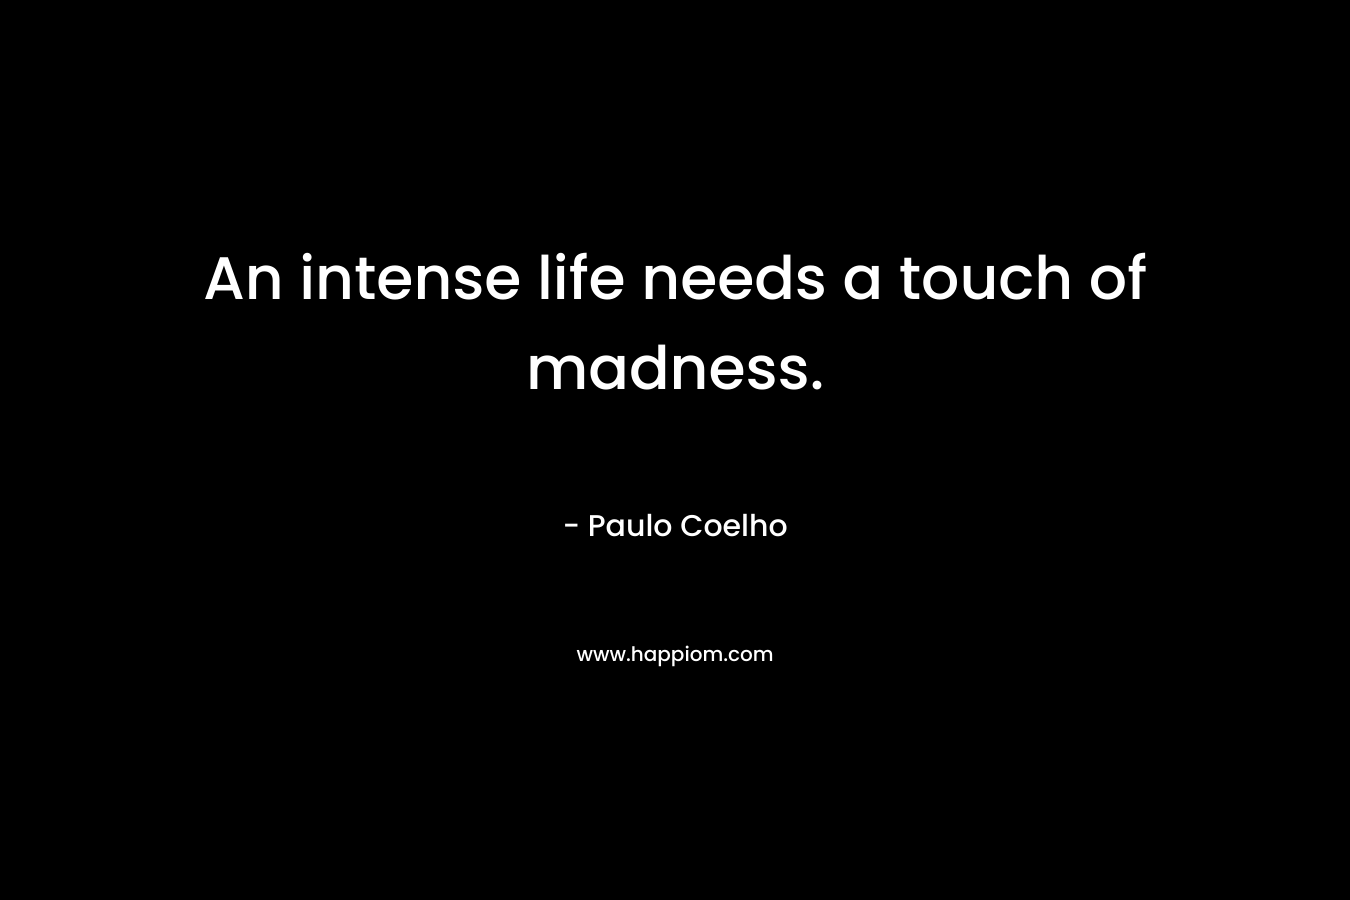 An intense life needs a touch of madness.